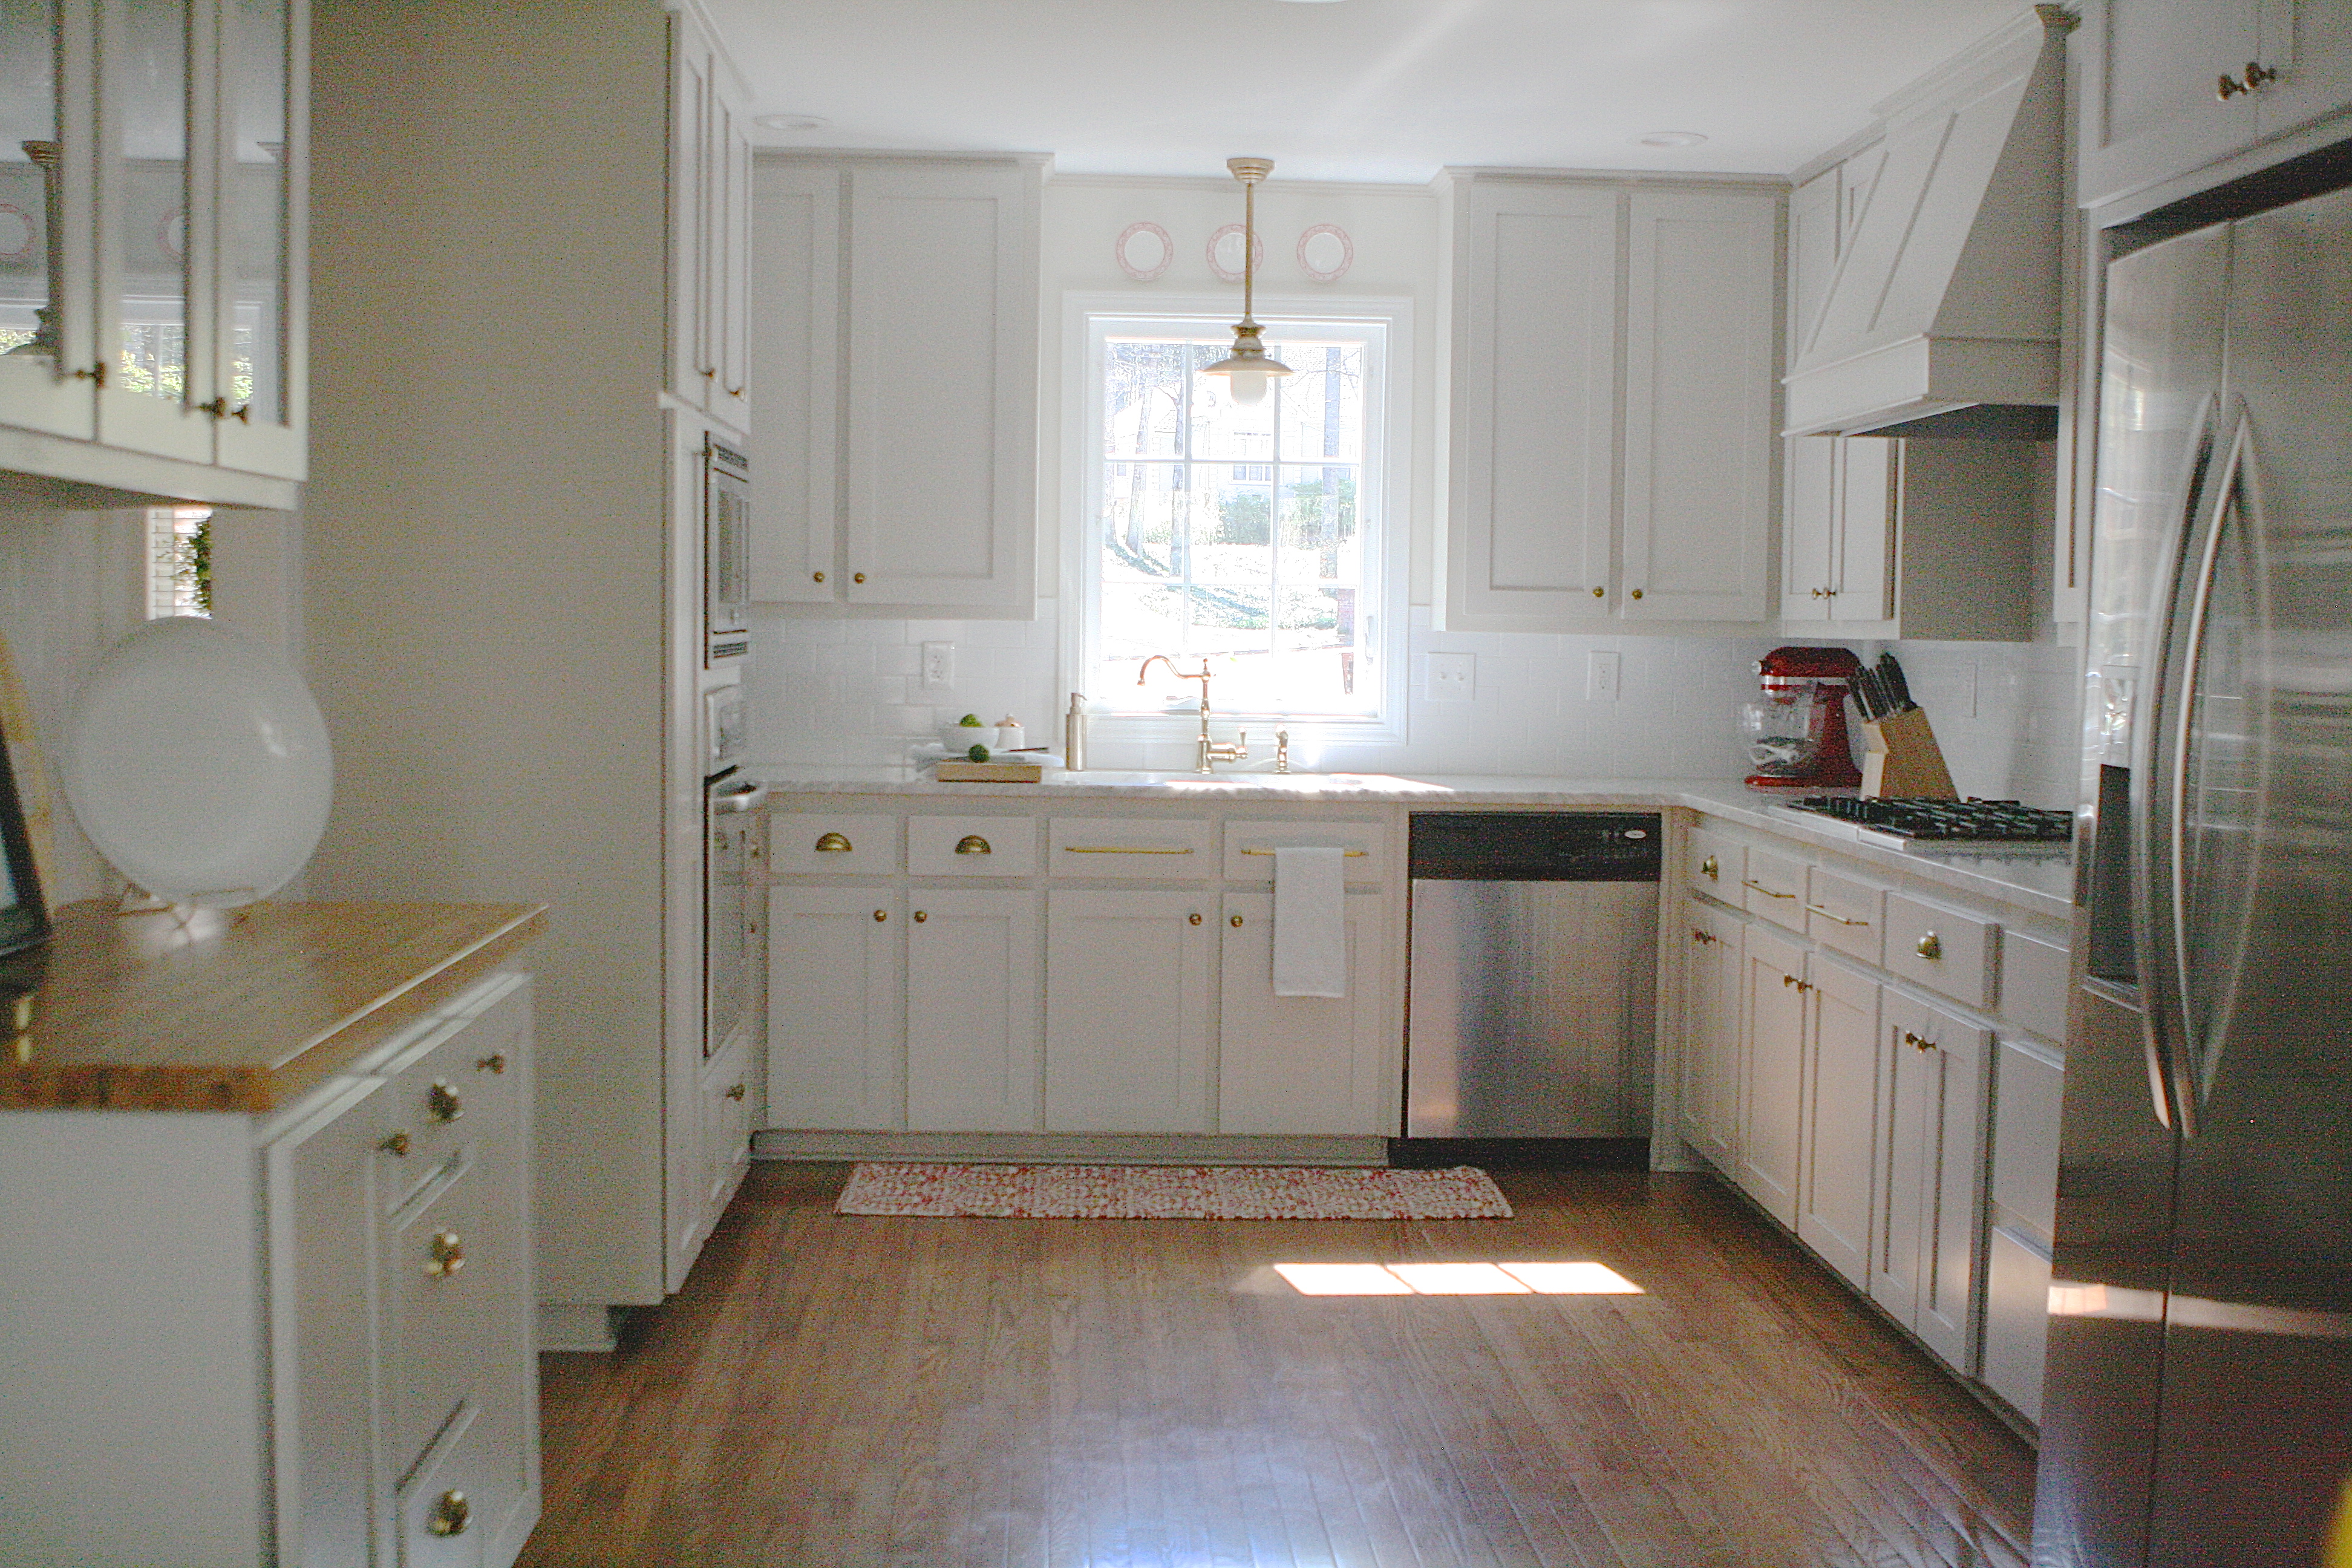 Mom’s Kitchen Renovation – Before and After